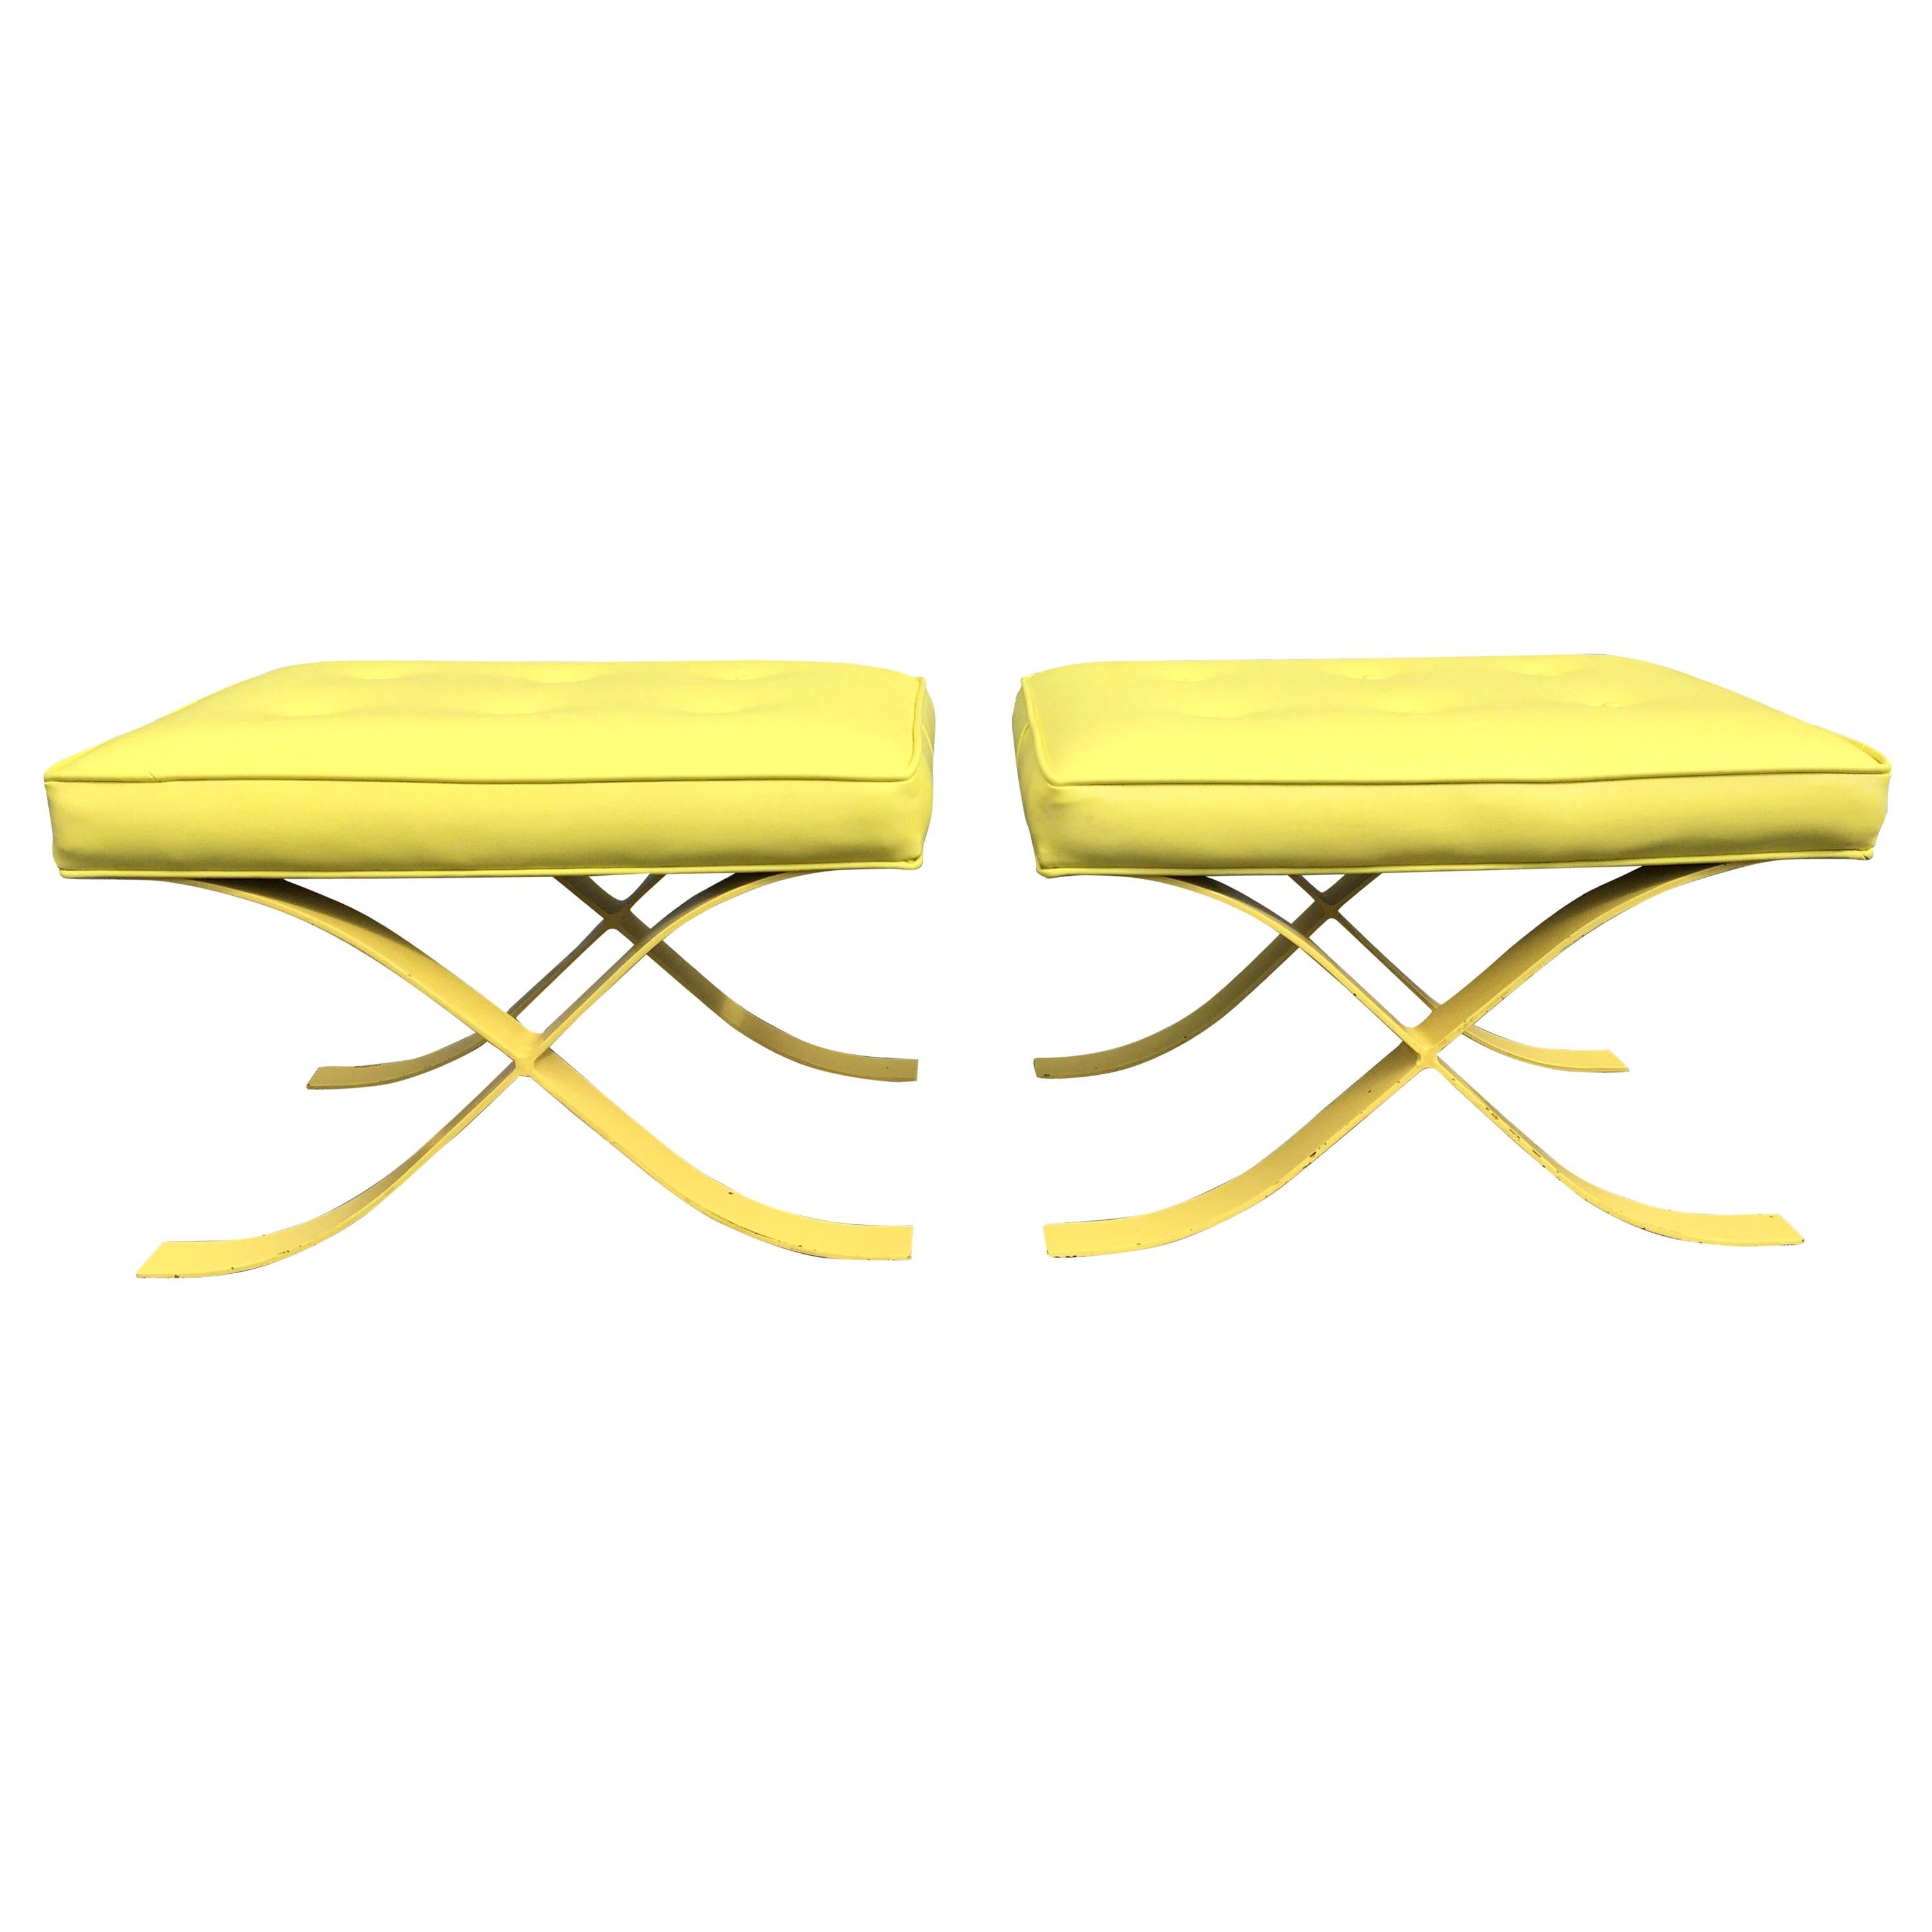 Pair of Mid-Century Modern Stools Ottomans Barcelona Style Yellow For Sale